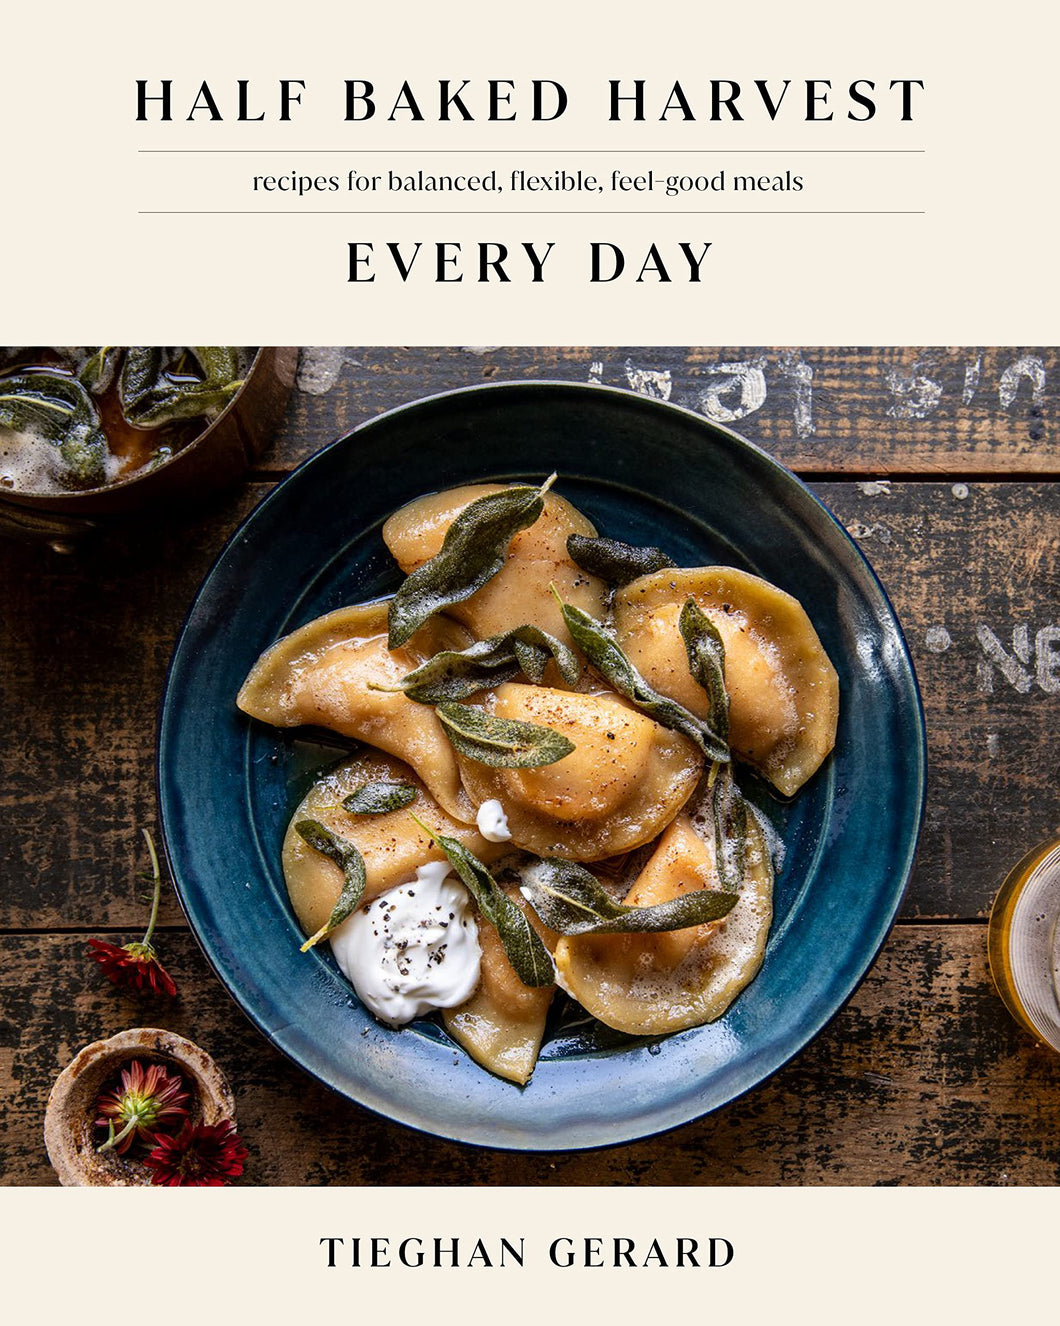 Half Baked Harvest: Every Day Cook Book